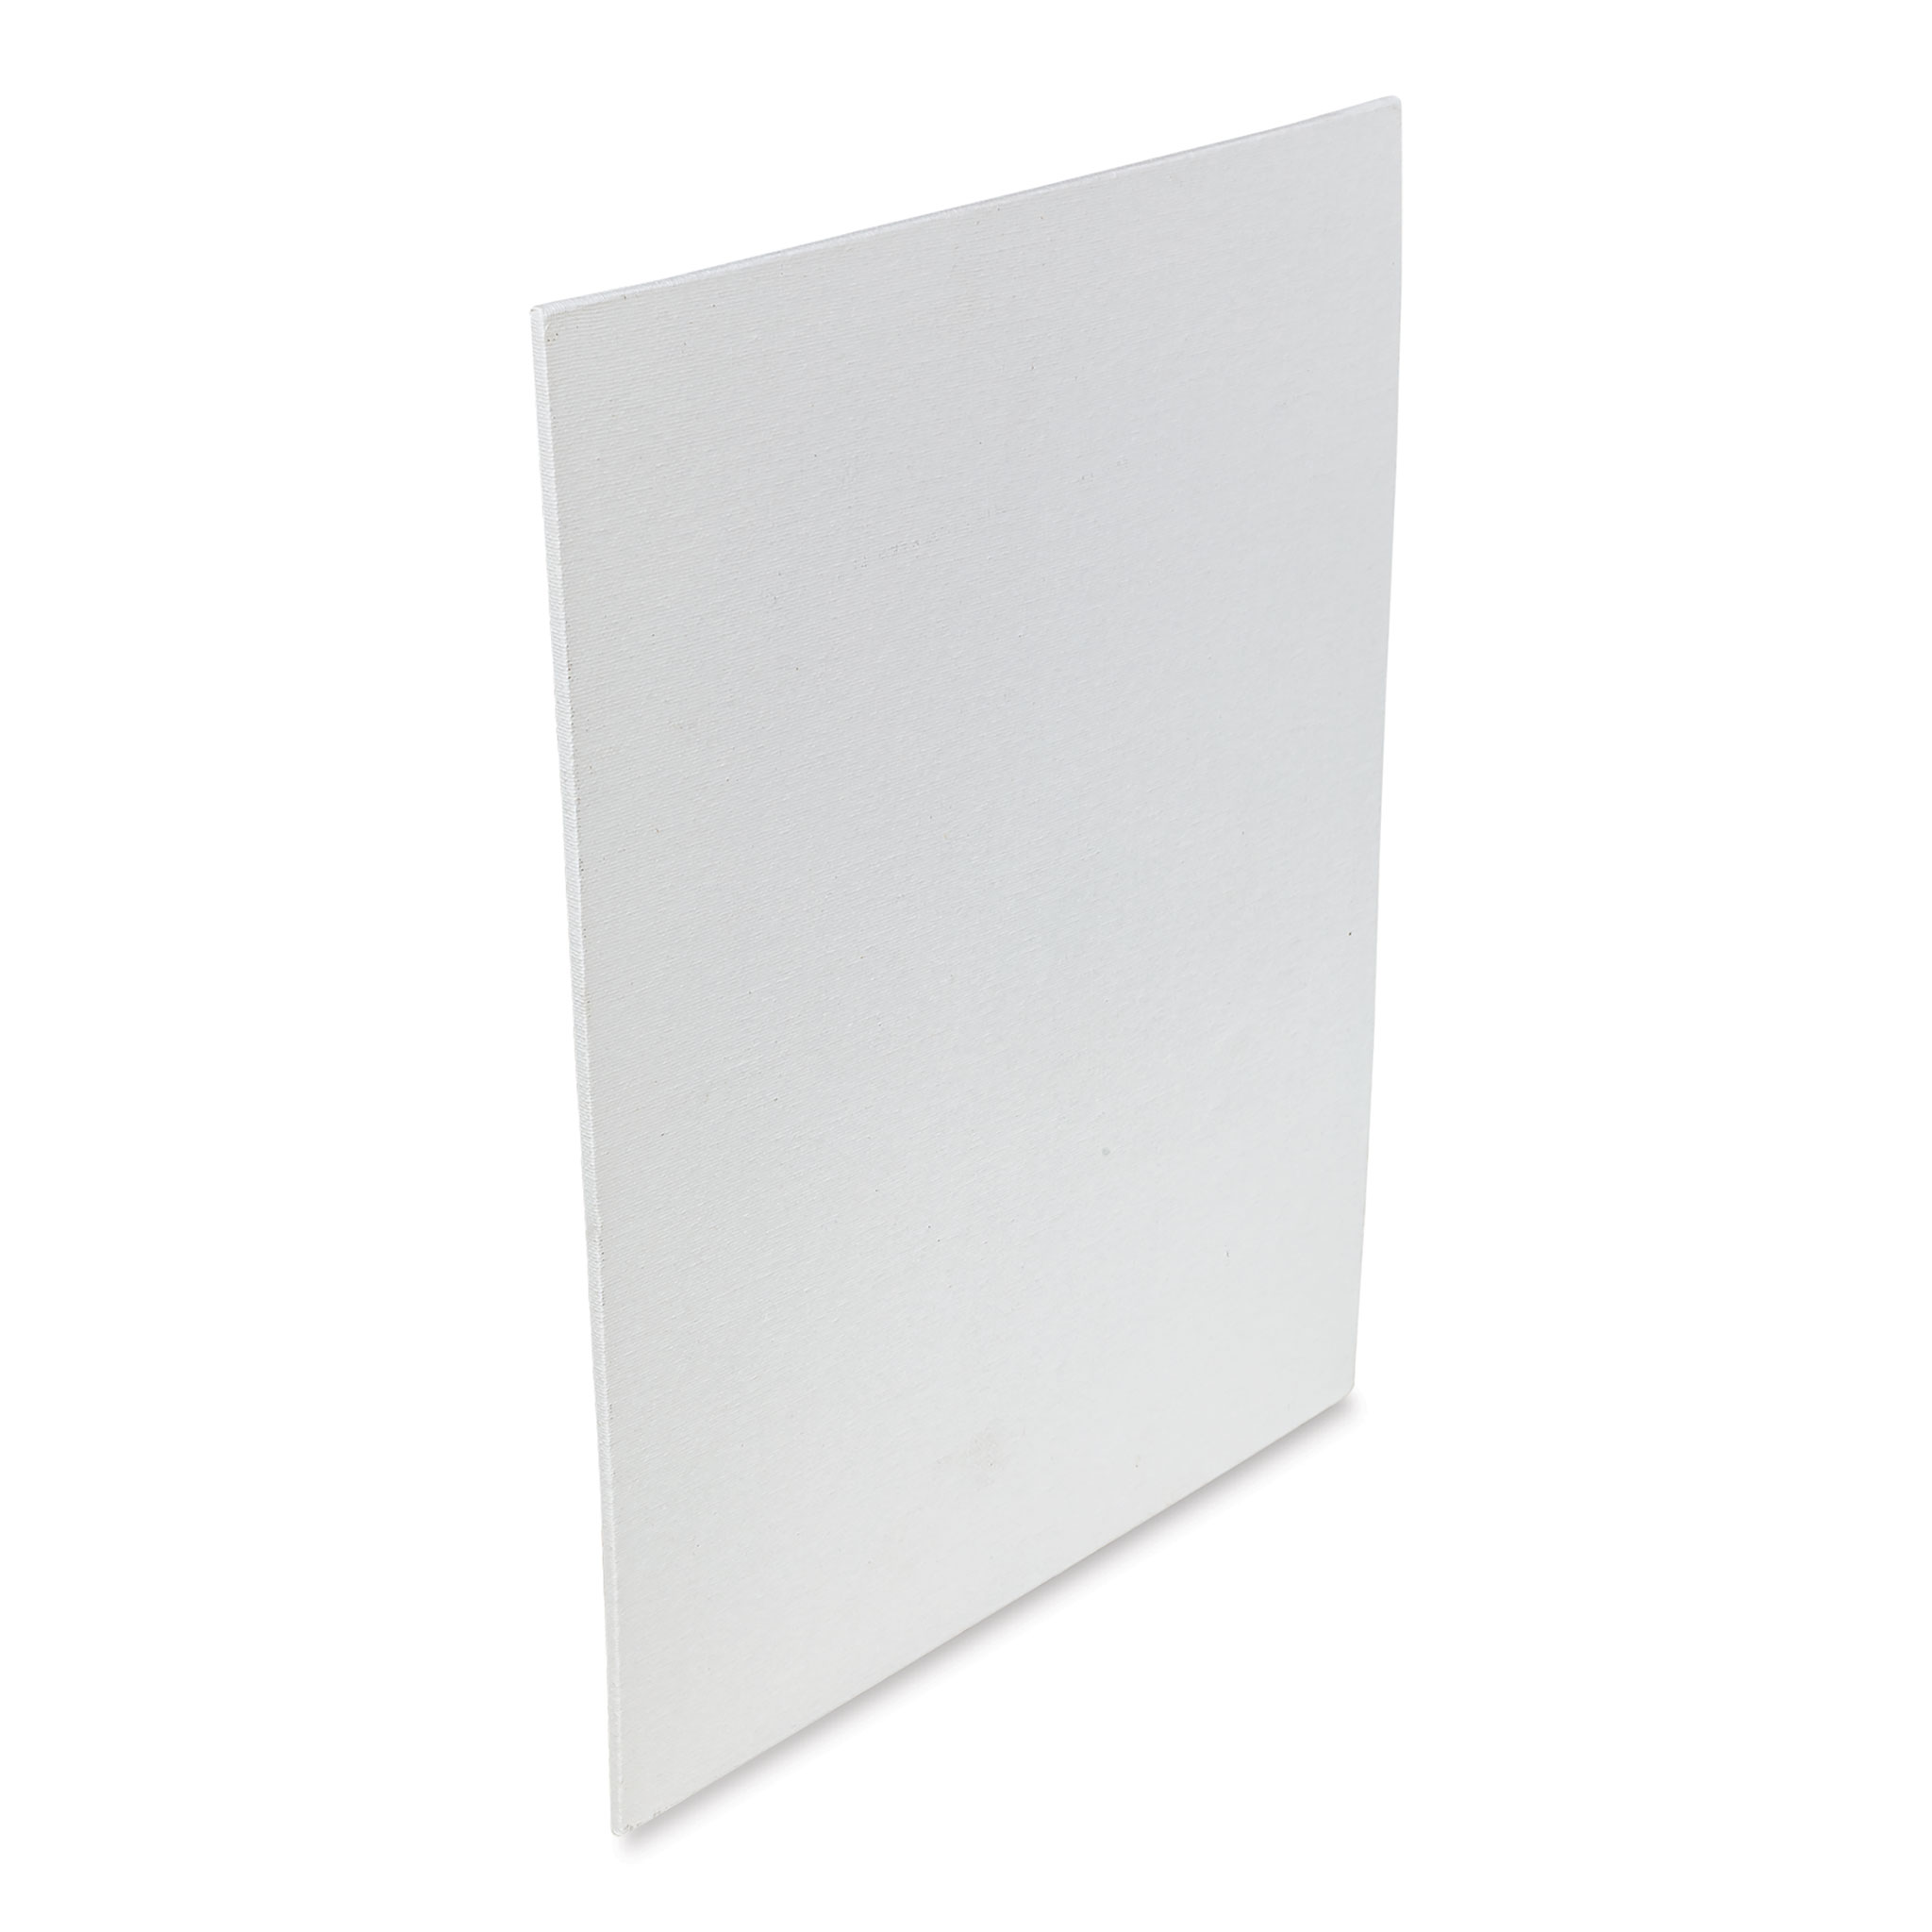 2 Blick Studio Canvas Boards for Painting Canvas Panels for Painting 11 X  14